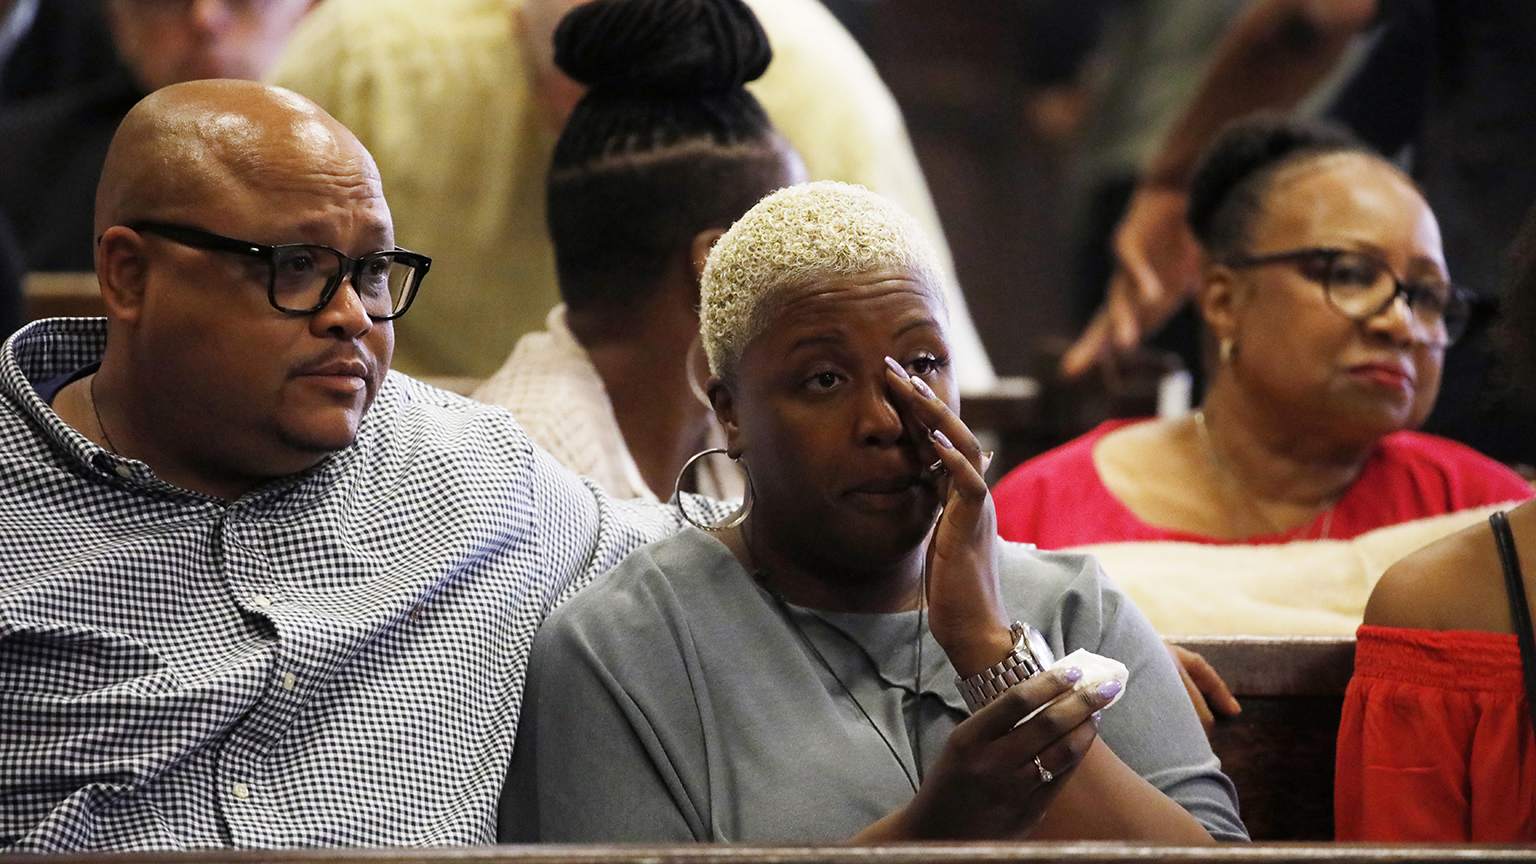 Nathaniel Pendleton Sr. and Cleopatra Cowley, parents of Hadiya Pendleton, listen to closing arguments in the Micheail Ward case during the trial for the fatal shooting of Hadiya Pendleton at the Leighton Criminal Court Building in Chicago on Aug. 23, 2018. (Jose M. Osorio / Chicago Tribune / Pool)